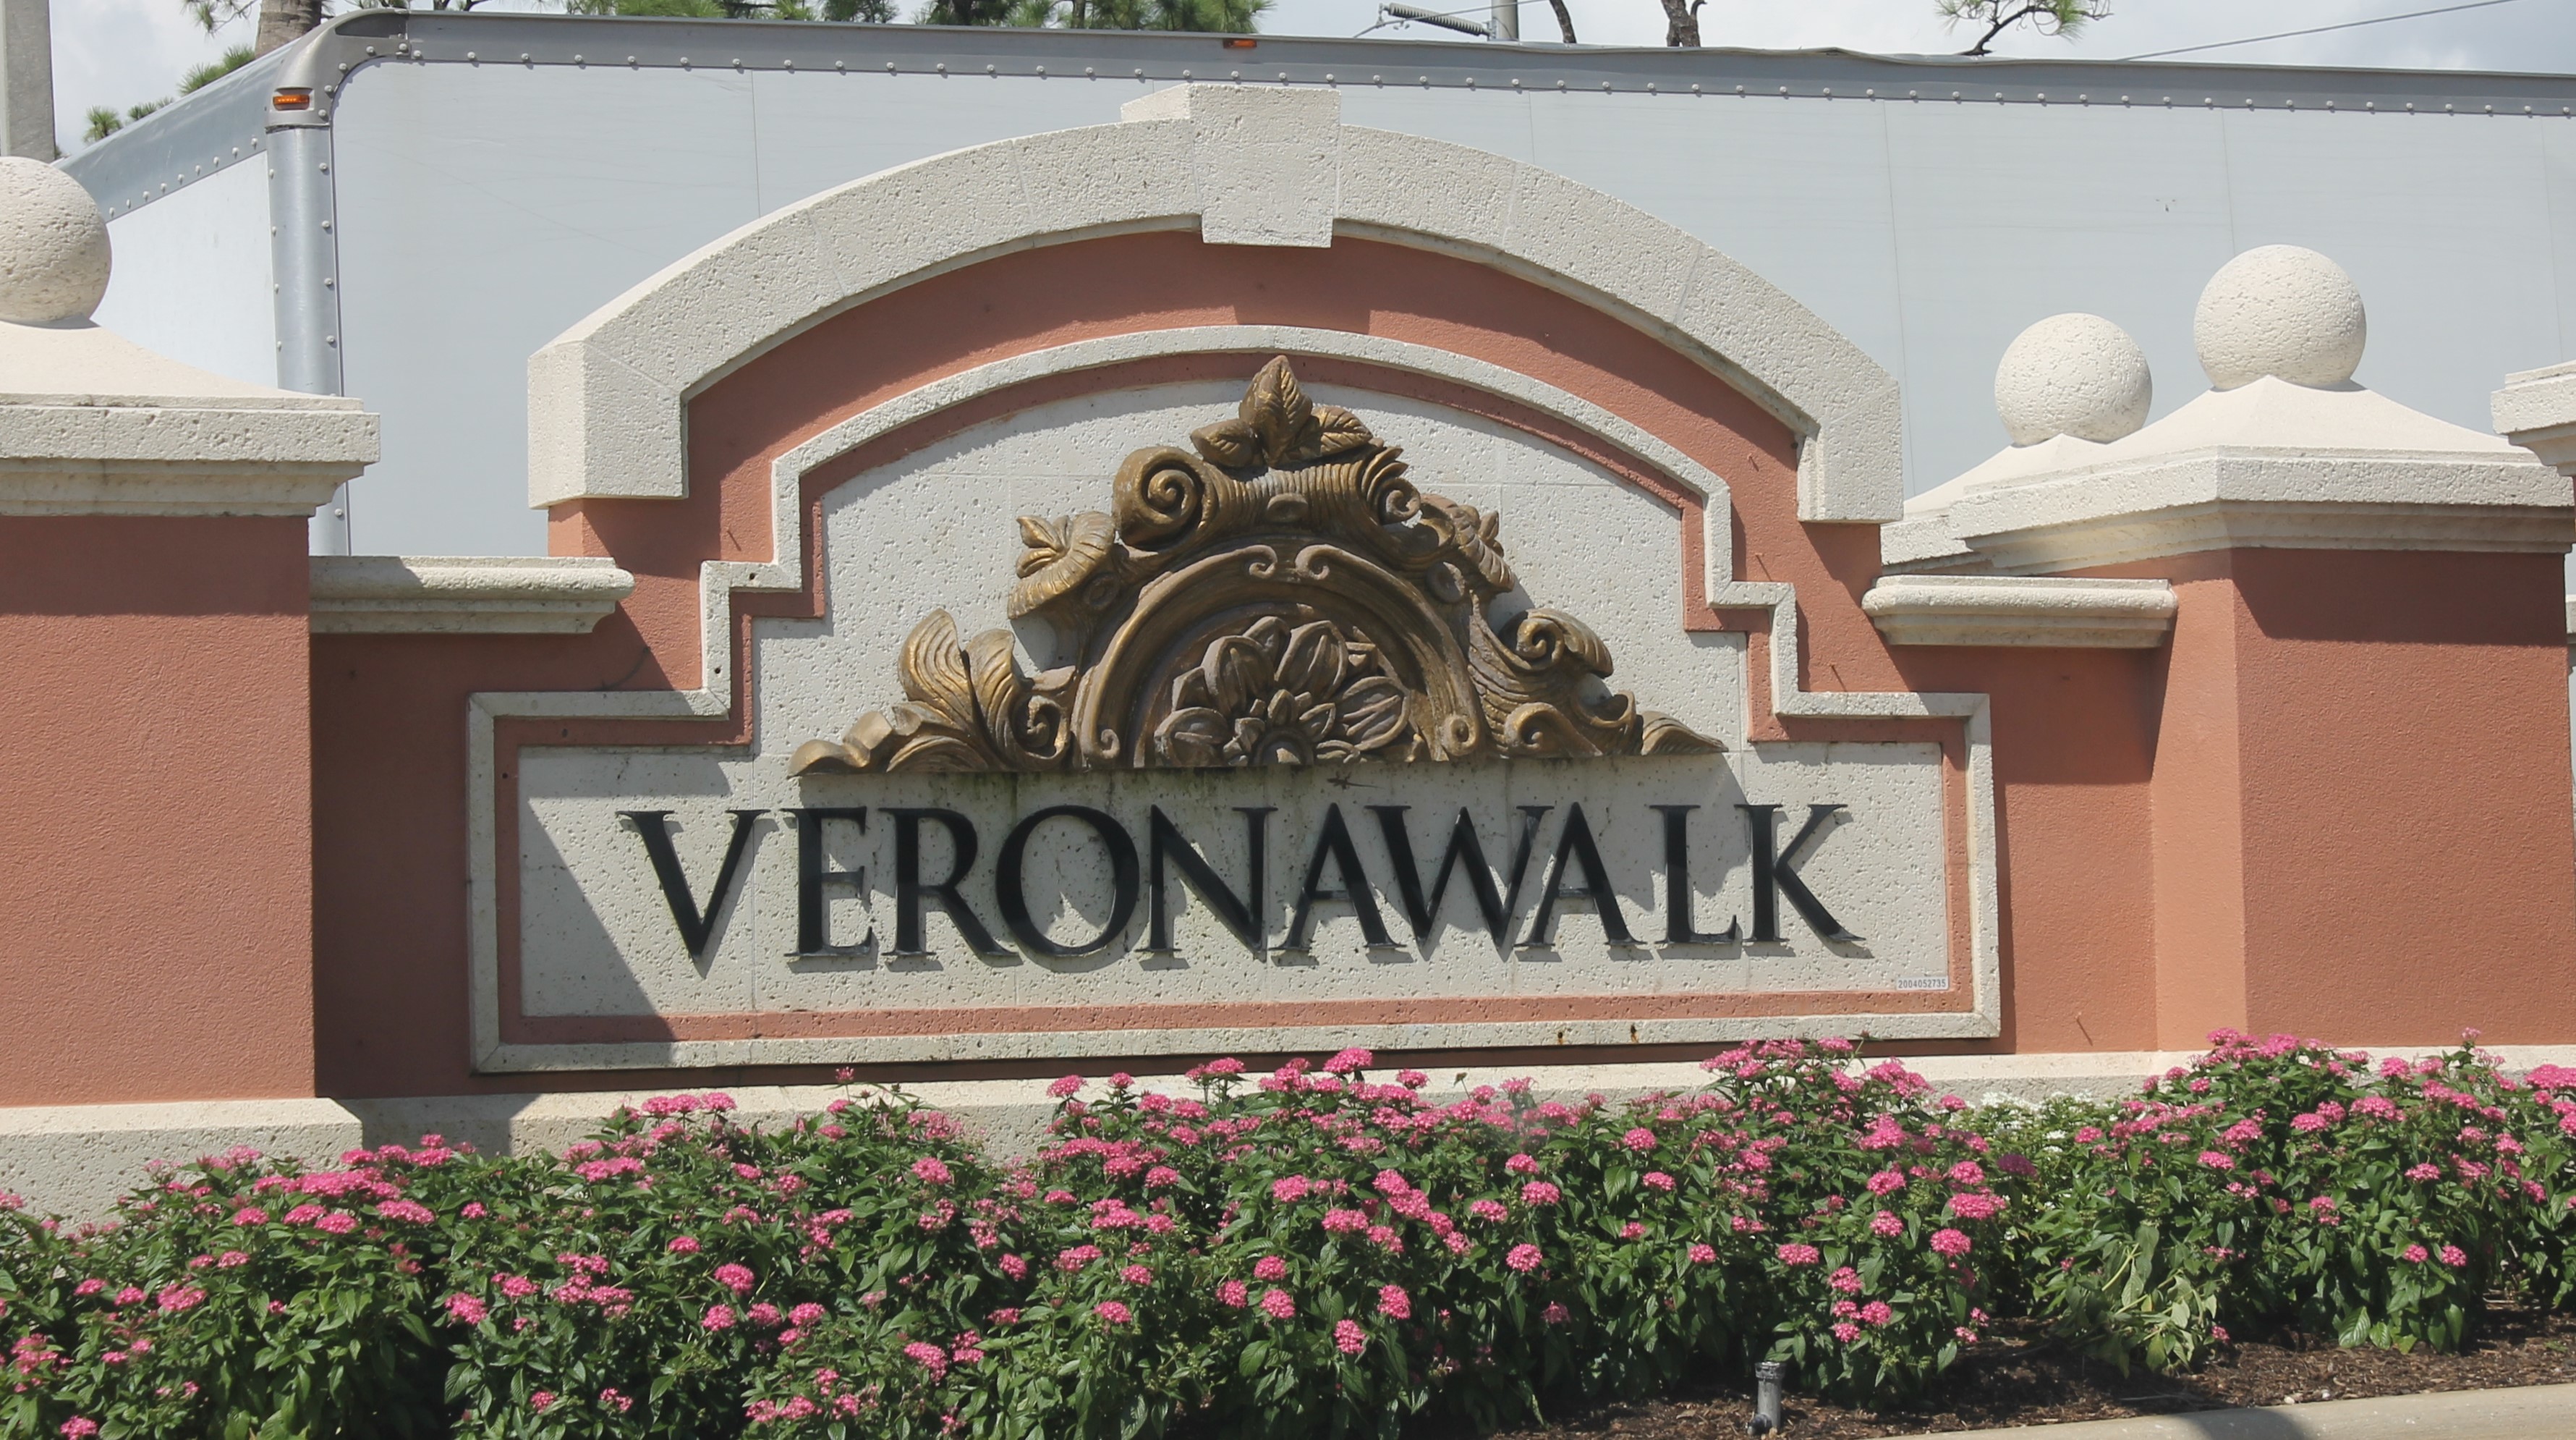 Verona Walk homes for sale and luxury real estate for sale in Verona Walk, a Marco Island community and luxury neighborhood in Marco Island Florida.